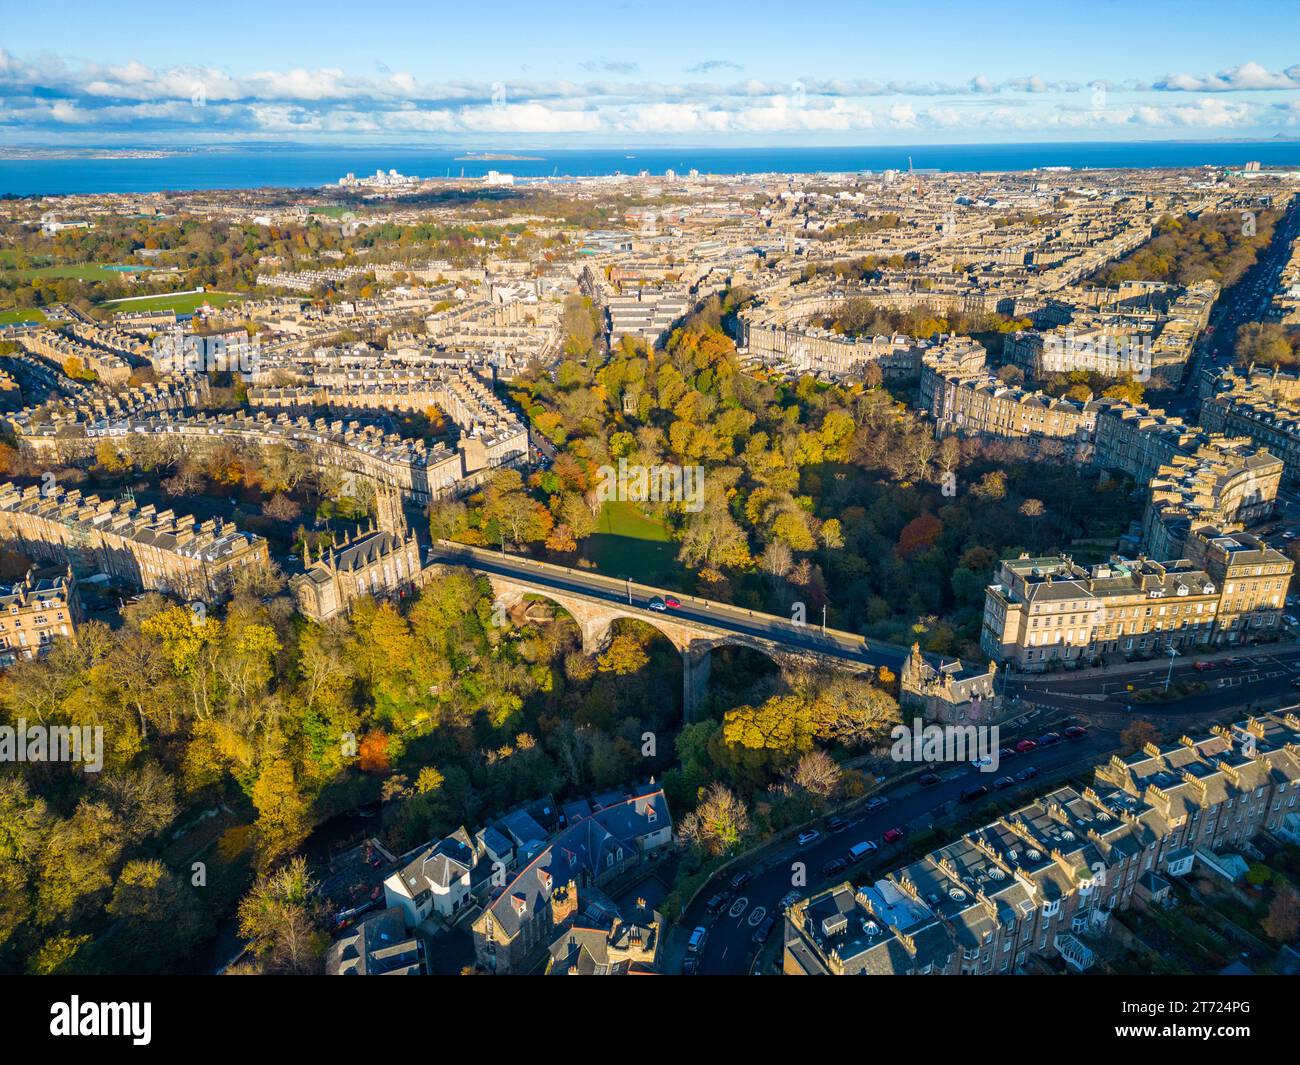 Aerial view in autumn of streets and housing in the West End of Edinburgh, Scotland, UK. Pic looking towards Dean Bridge across the Water of Leith in Stock Photo